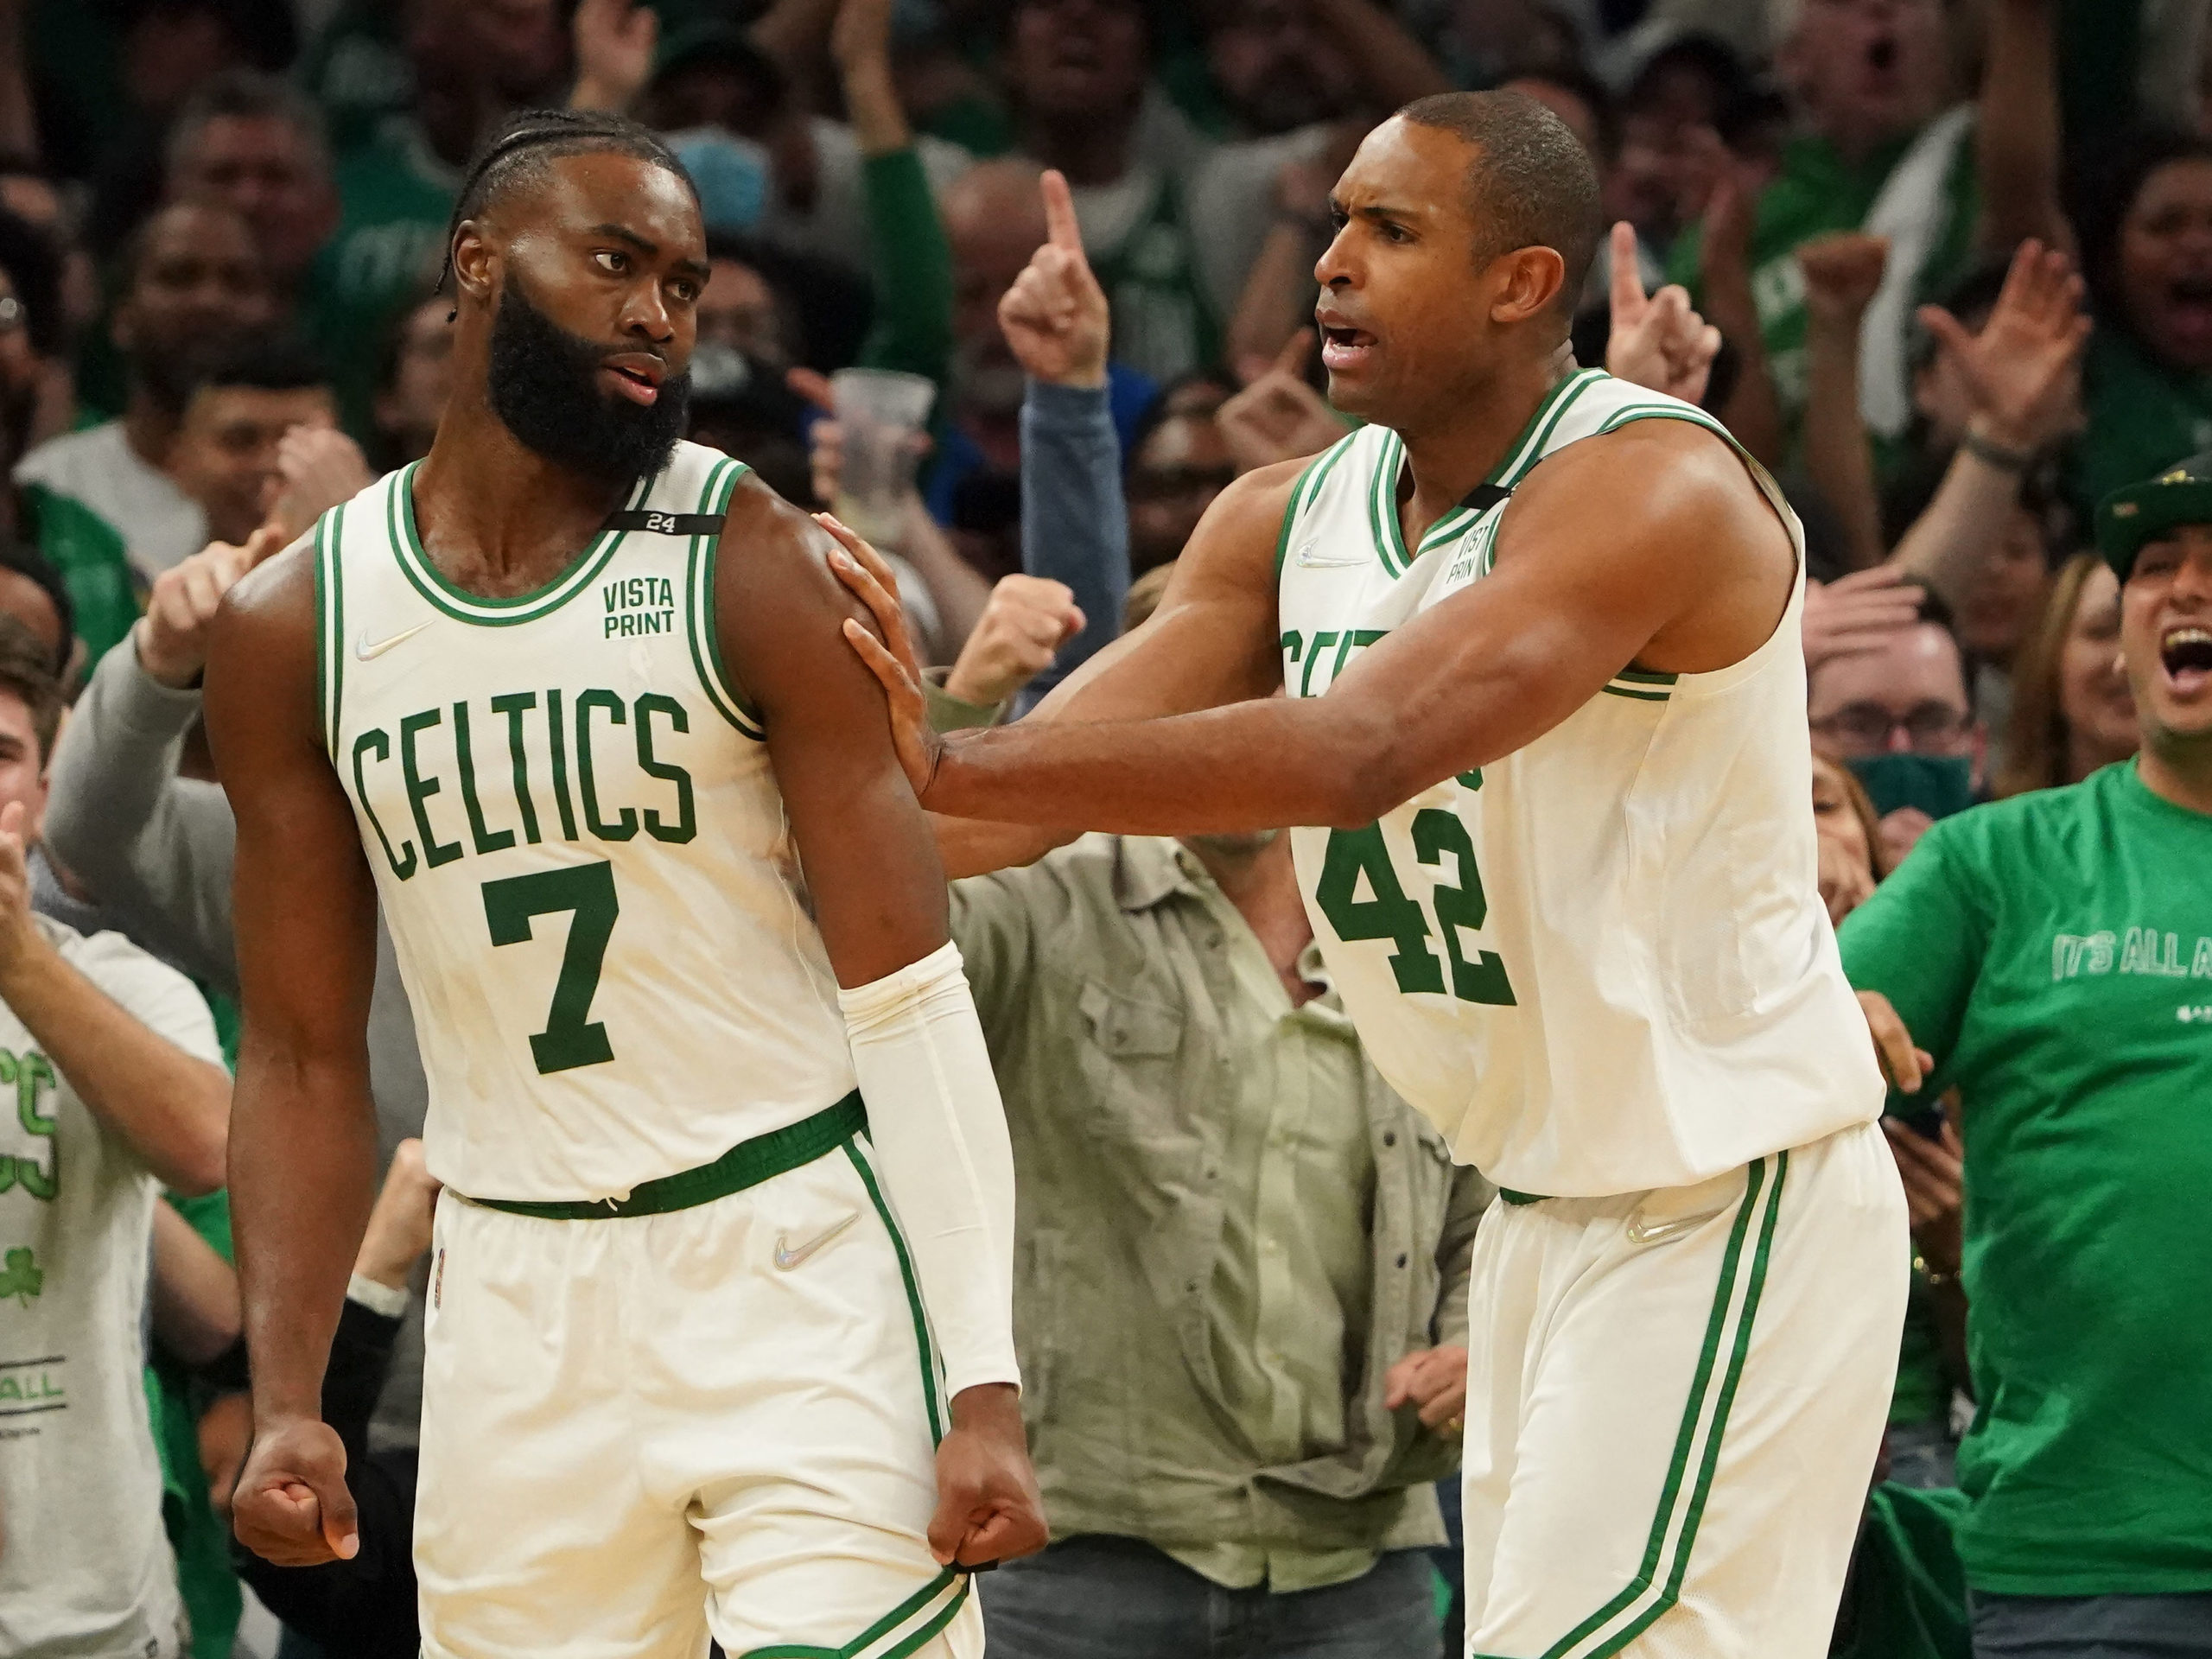 Jun 8, 2022; Boston, Massachusetts, USA; Boston Celtics center Al Horford (42) reacts after guard Jaylen Brown (7) blocks a shot by the Golden State Warriors in the fourth quarter during game three of the 2022 NBA Finals at TD Garden. Mandatory Credit: Kyle Terada-USA TODAY Sports